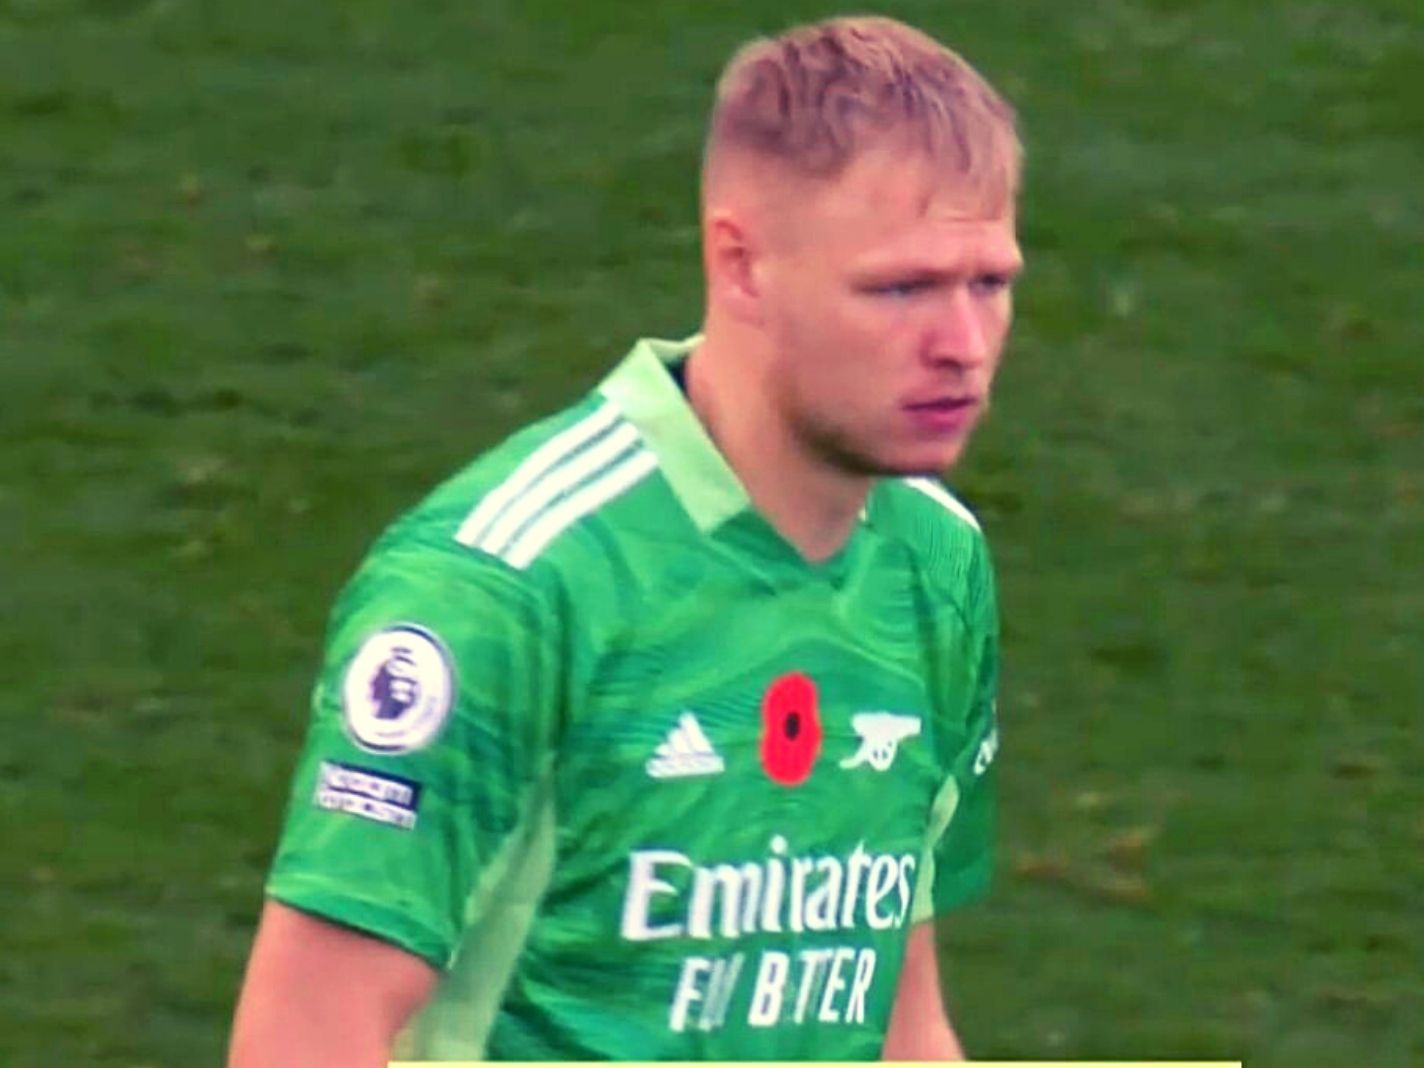 Aaron Ramsdale was the MOTM against Leicester City